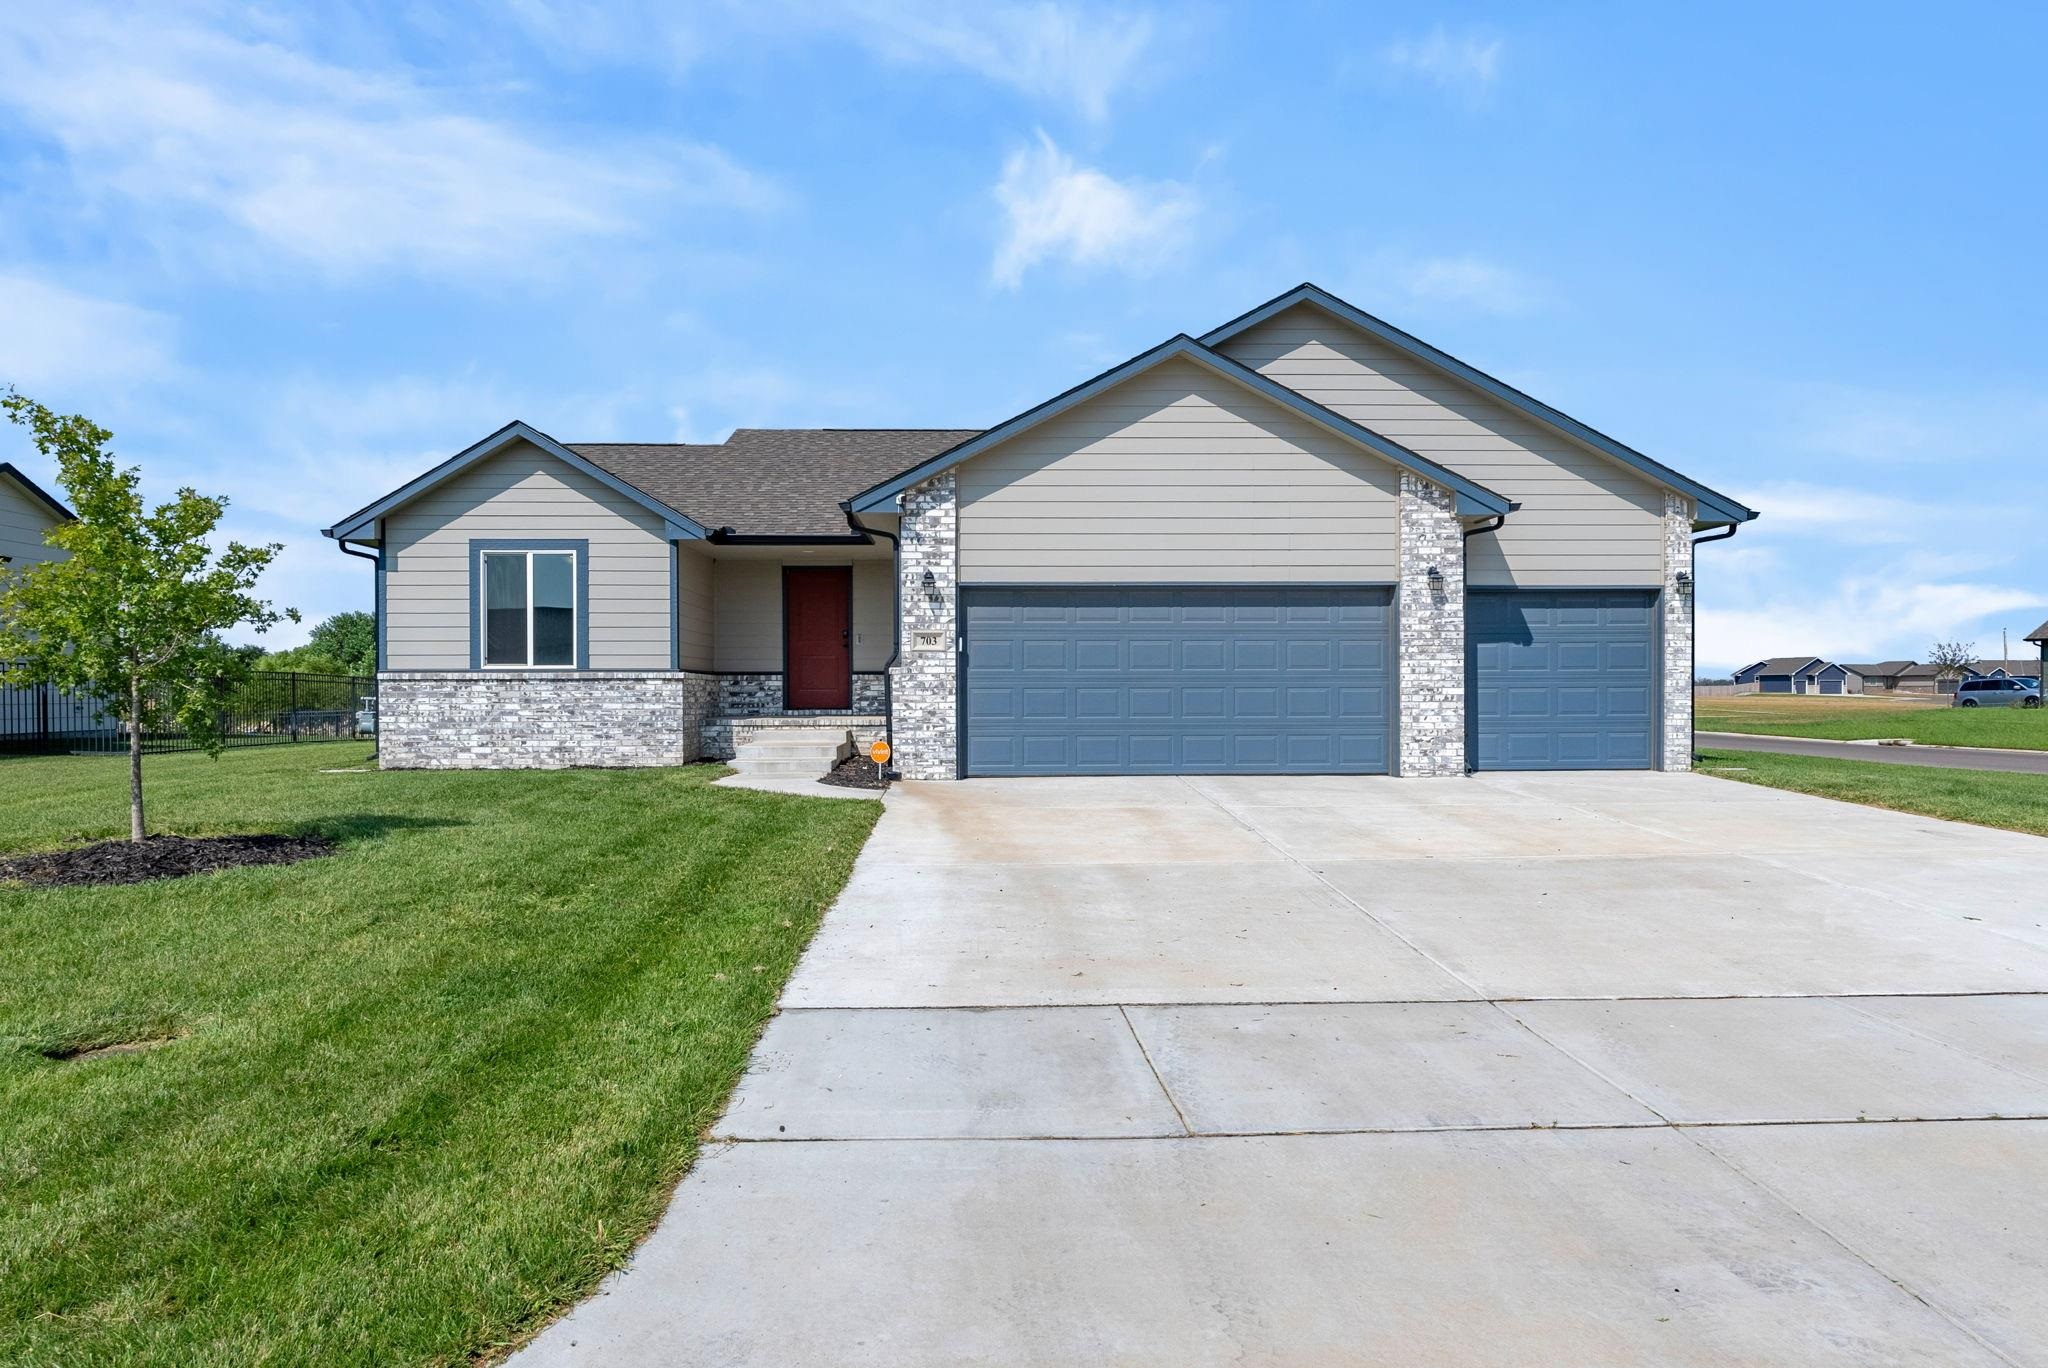 Photo of 703 W Country Lakes Pl in Haysville, KS